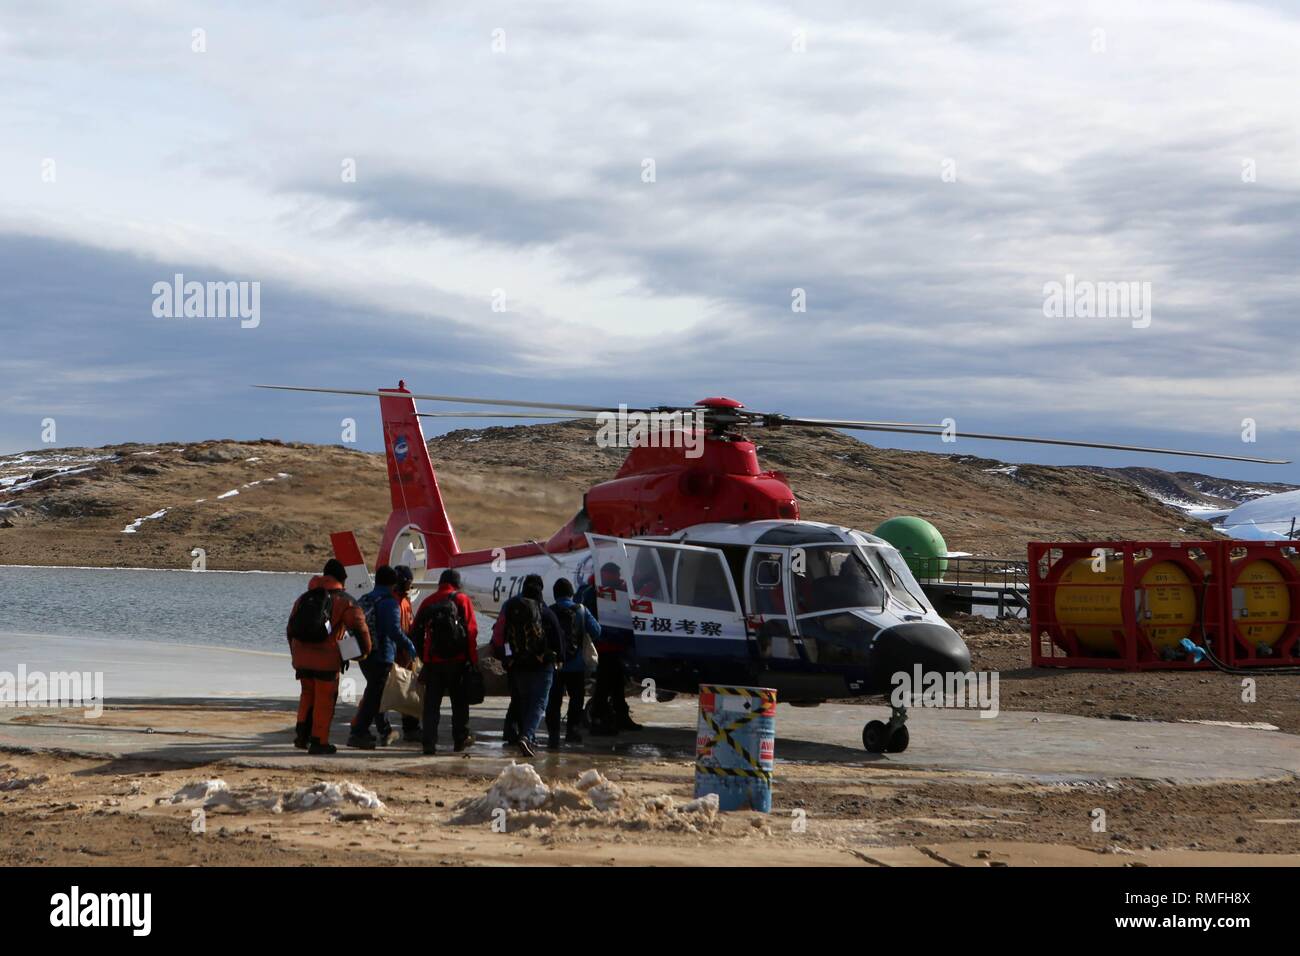 Aboard Xuelong. 13th Feb, 2019. A helicopter picks up members of China's 35th Antarctic expedition team from the Zhongshan Station to China's research icebreaker Xuelong, Feb. 13, 2019. China's research icebreaker Xuelong, with 126 crew members aboard on the 35th Antarctic research mission, on Thursday local time left the Zhongshan Station on its way back to China. Snow Eagle 601, China's first fixed-wing aircraft for polar flight, on Thursday night also departed from the Antarctic after completing all assignments. Credit: Liu Shiping/Xinhua/Alamy Live News Stock Photo